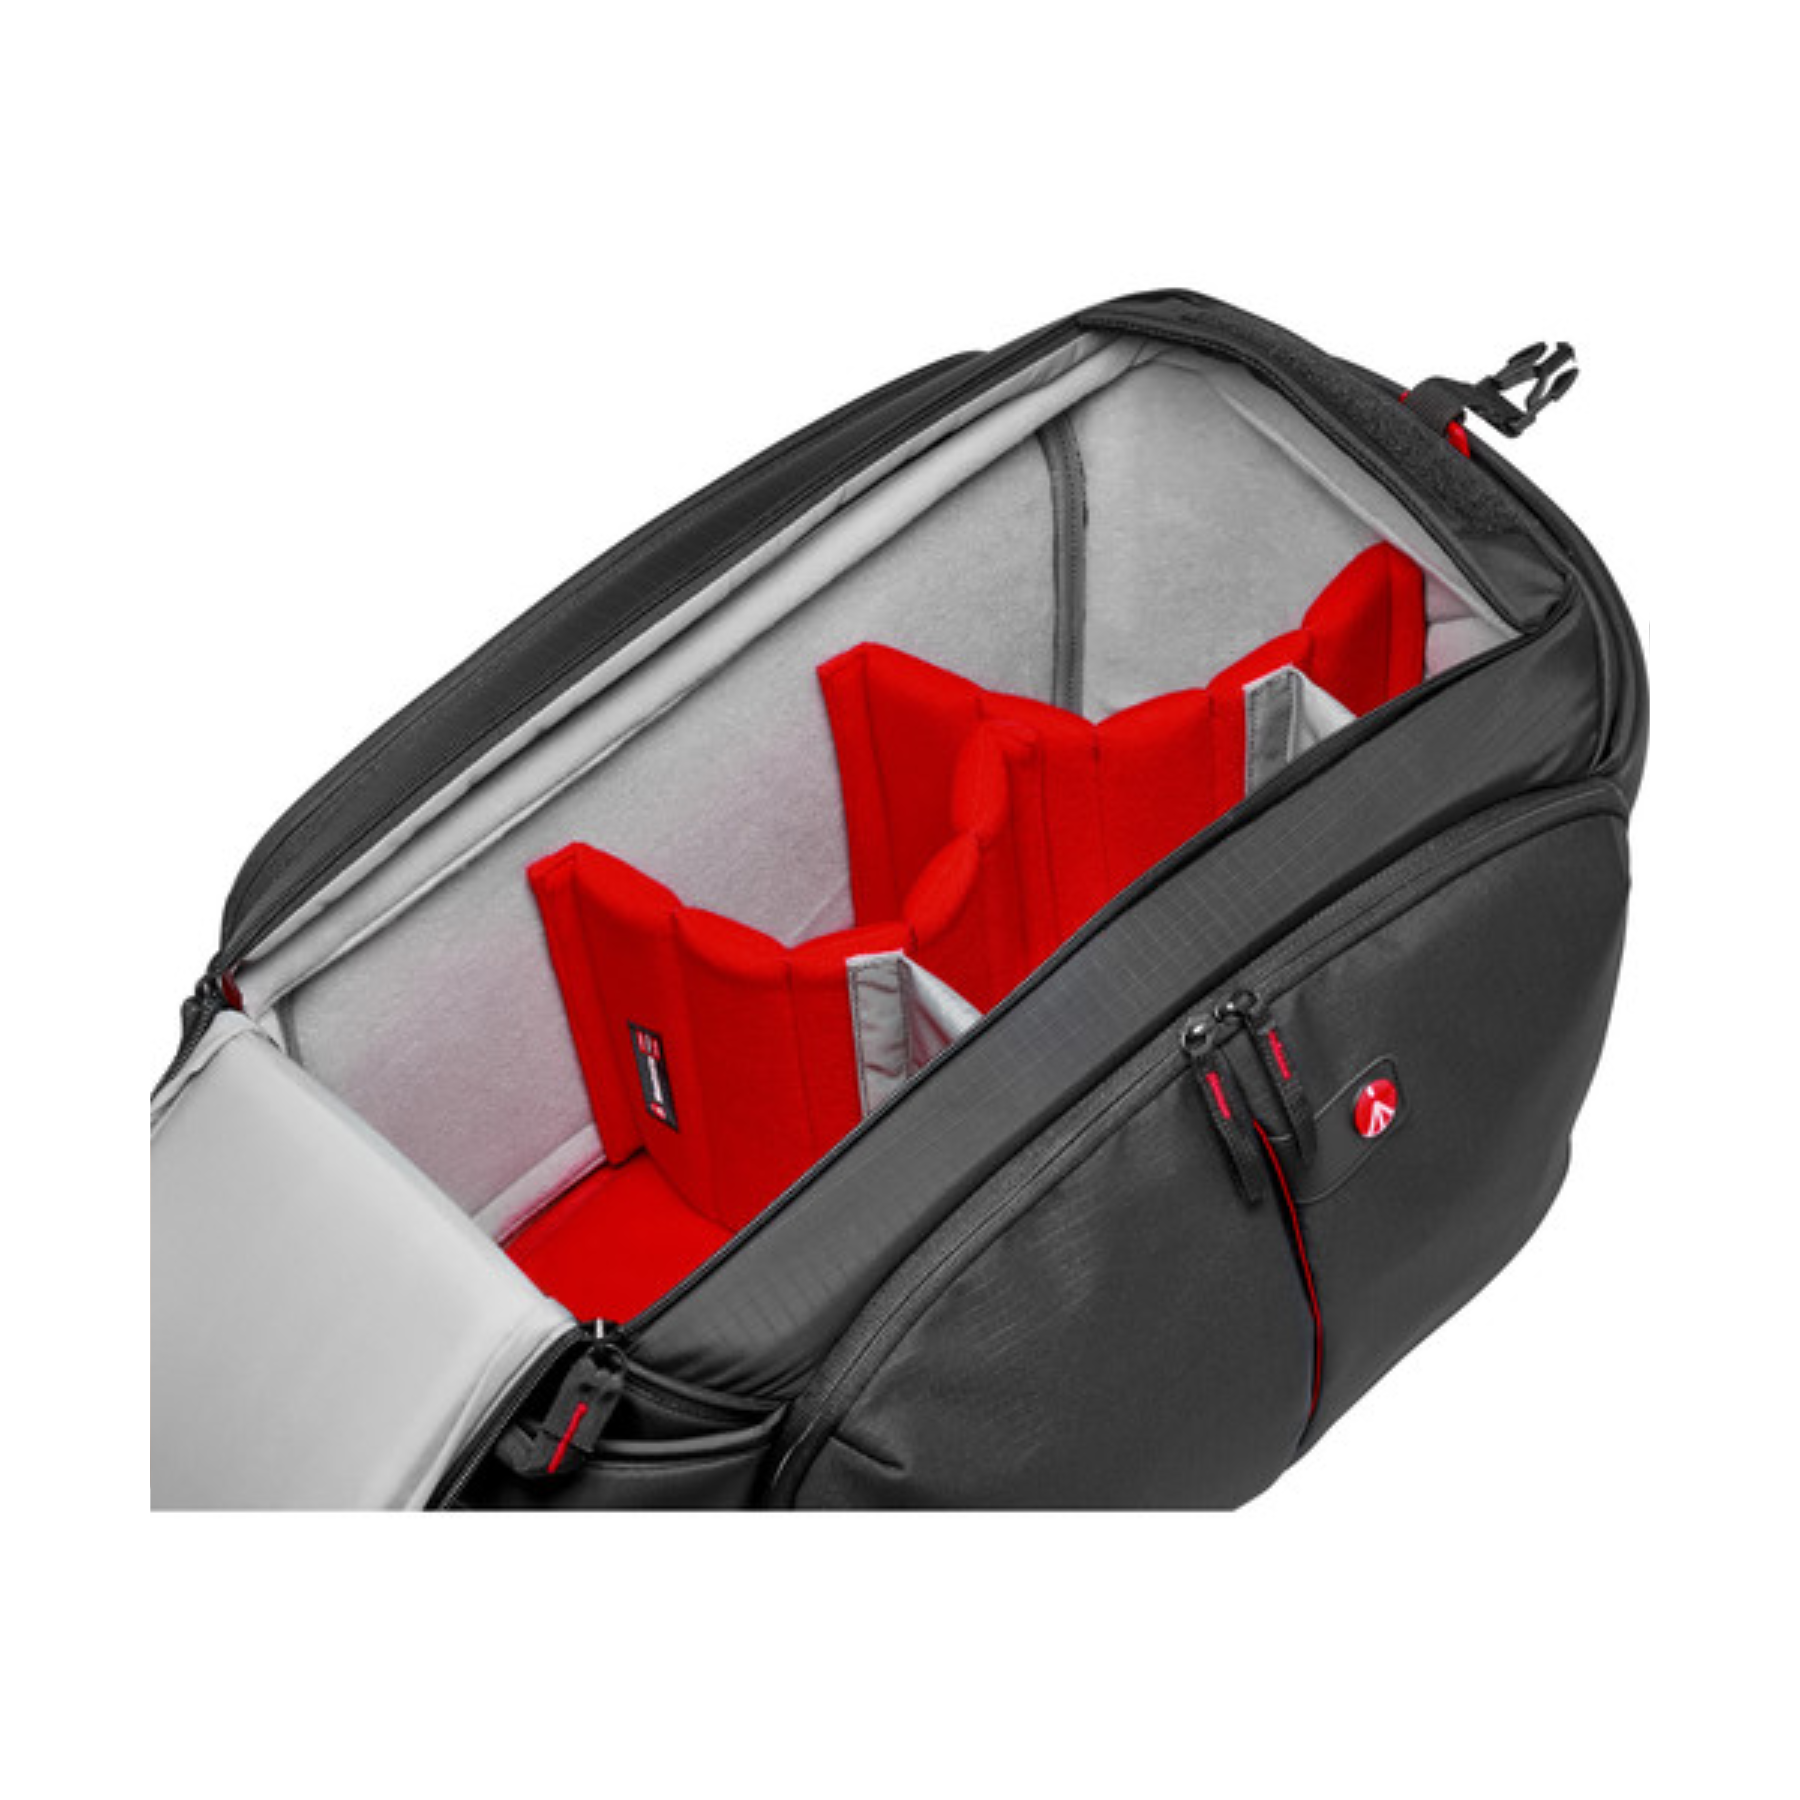 Buy Manfrotto 192N Pro Light Camcorder Case at Topic Store